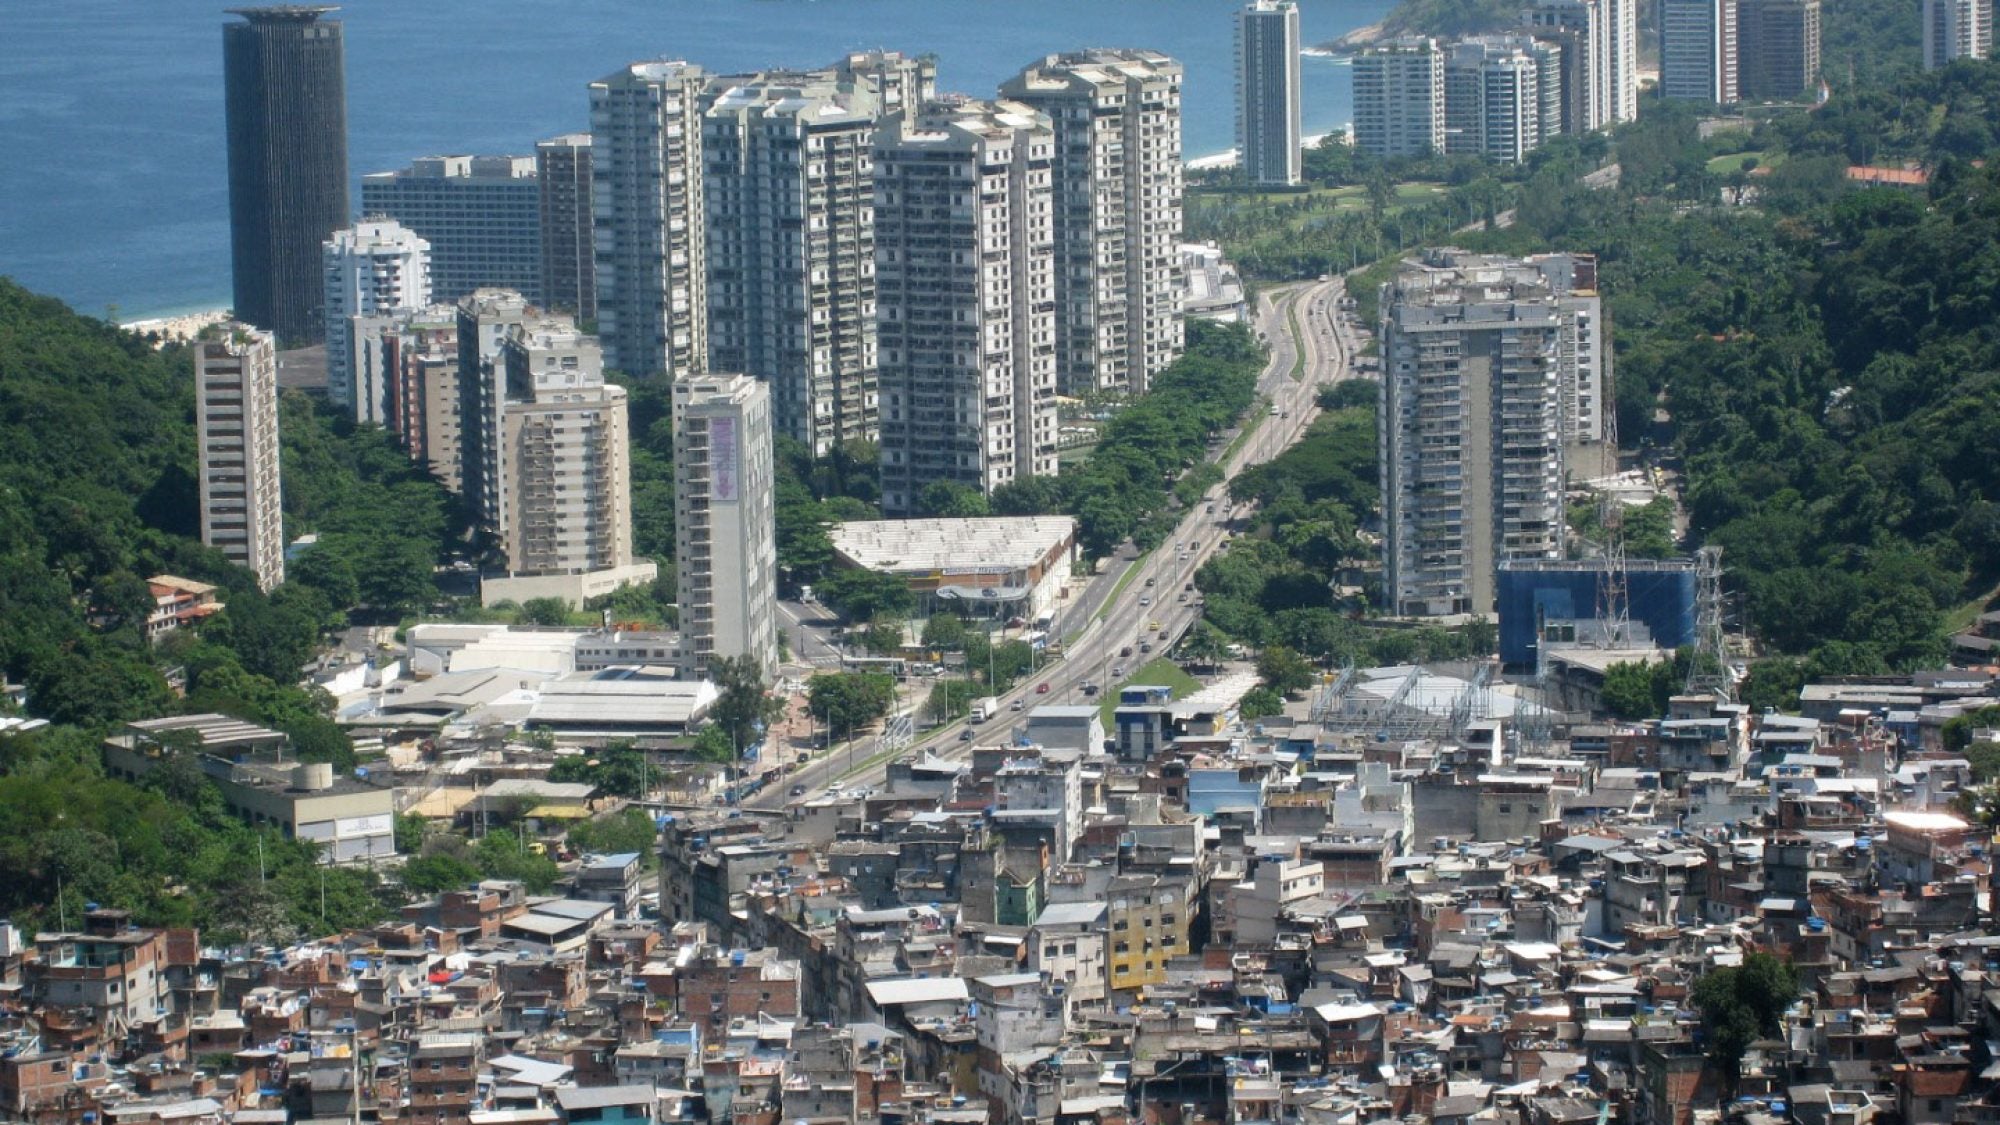 Grey skyscrapers across a highway from a favela in Brazil